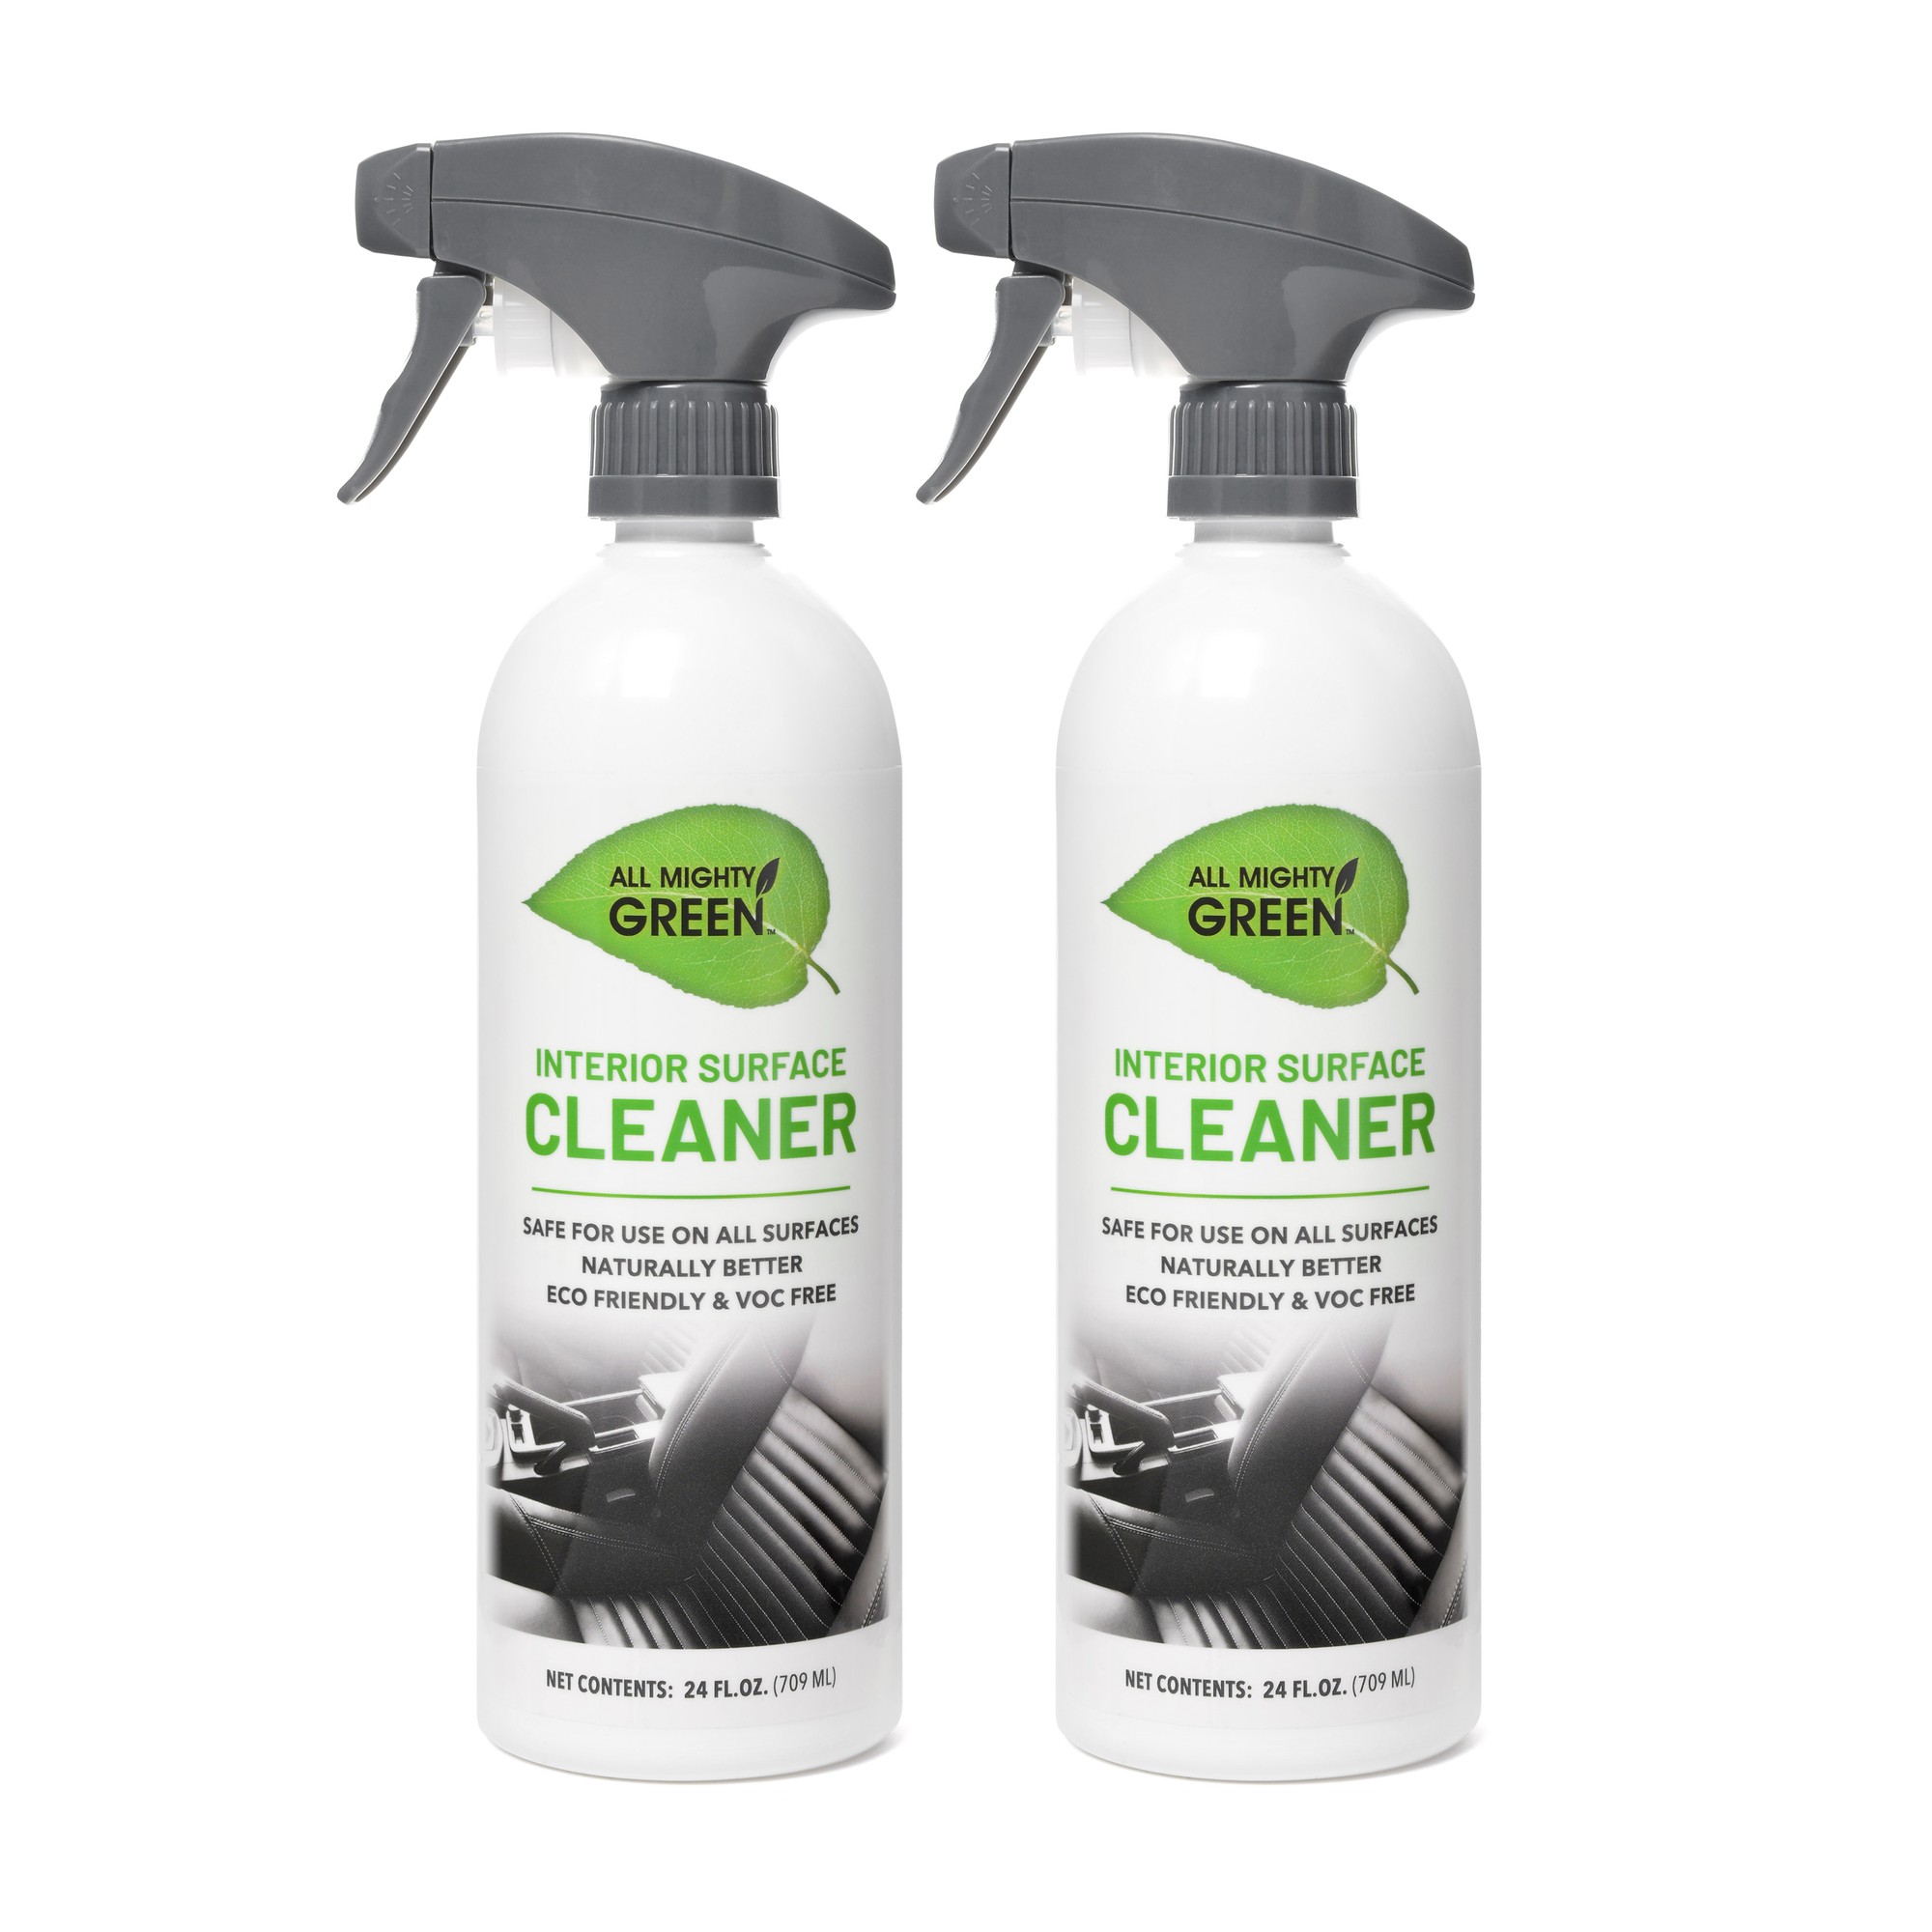 ALL MIGHTY GREEN Interior Surface Cleaner